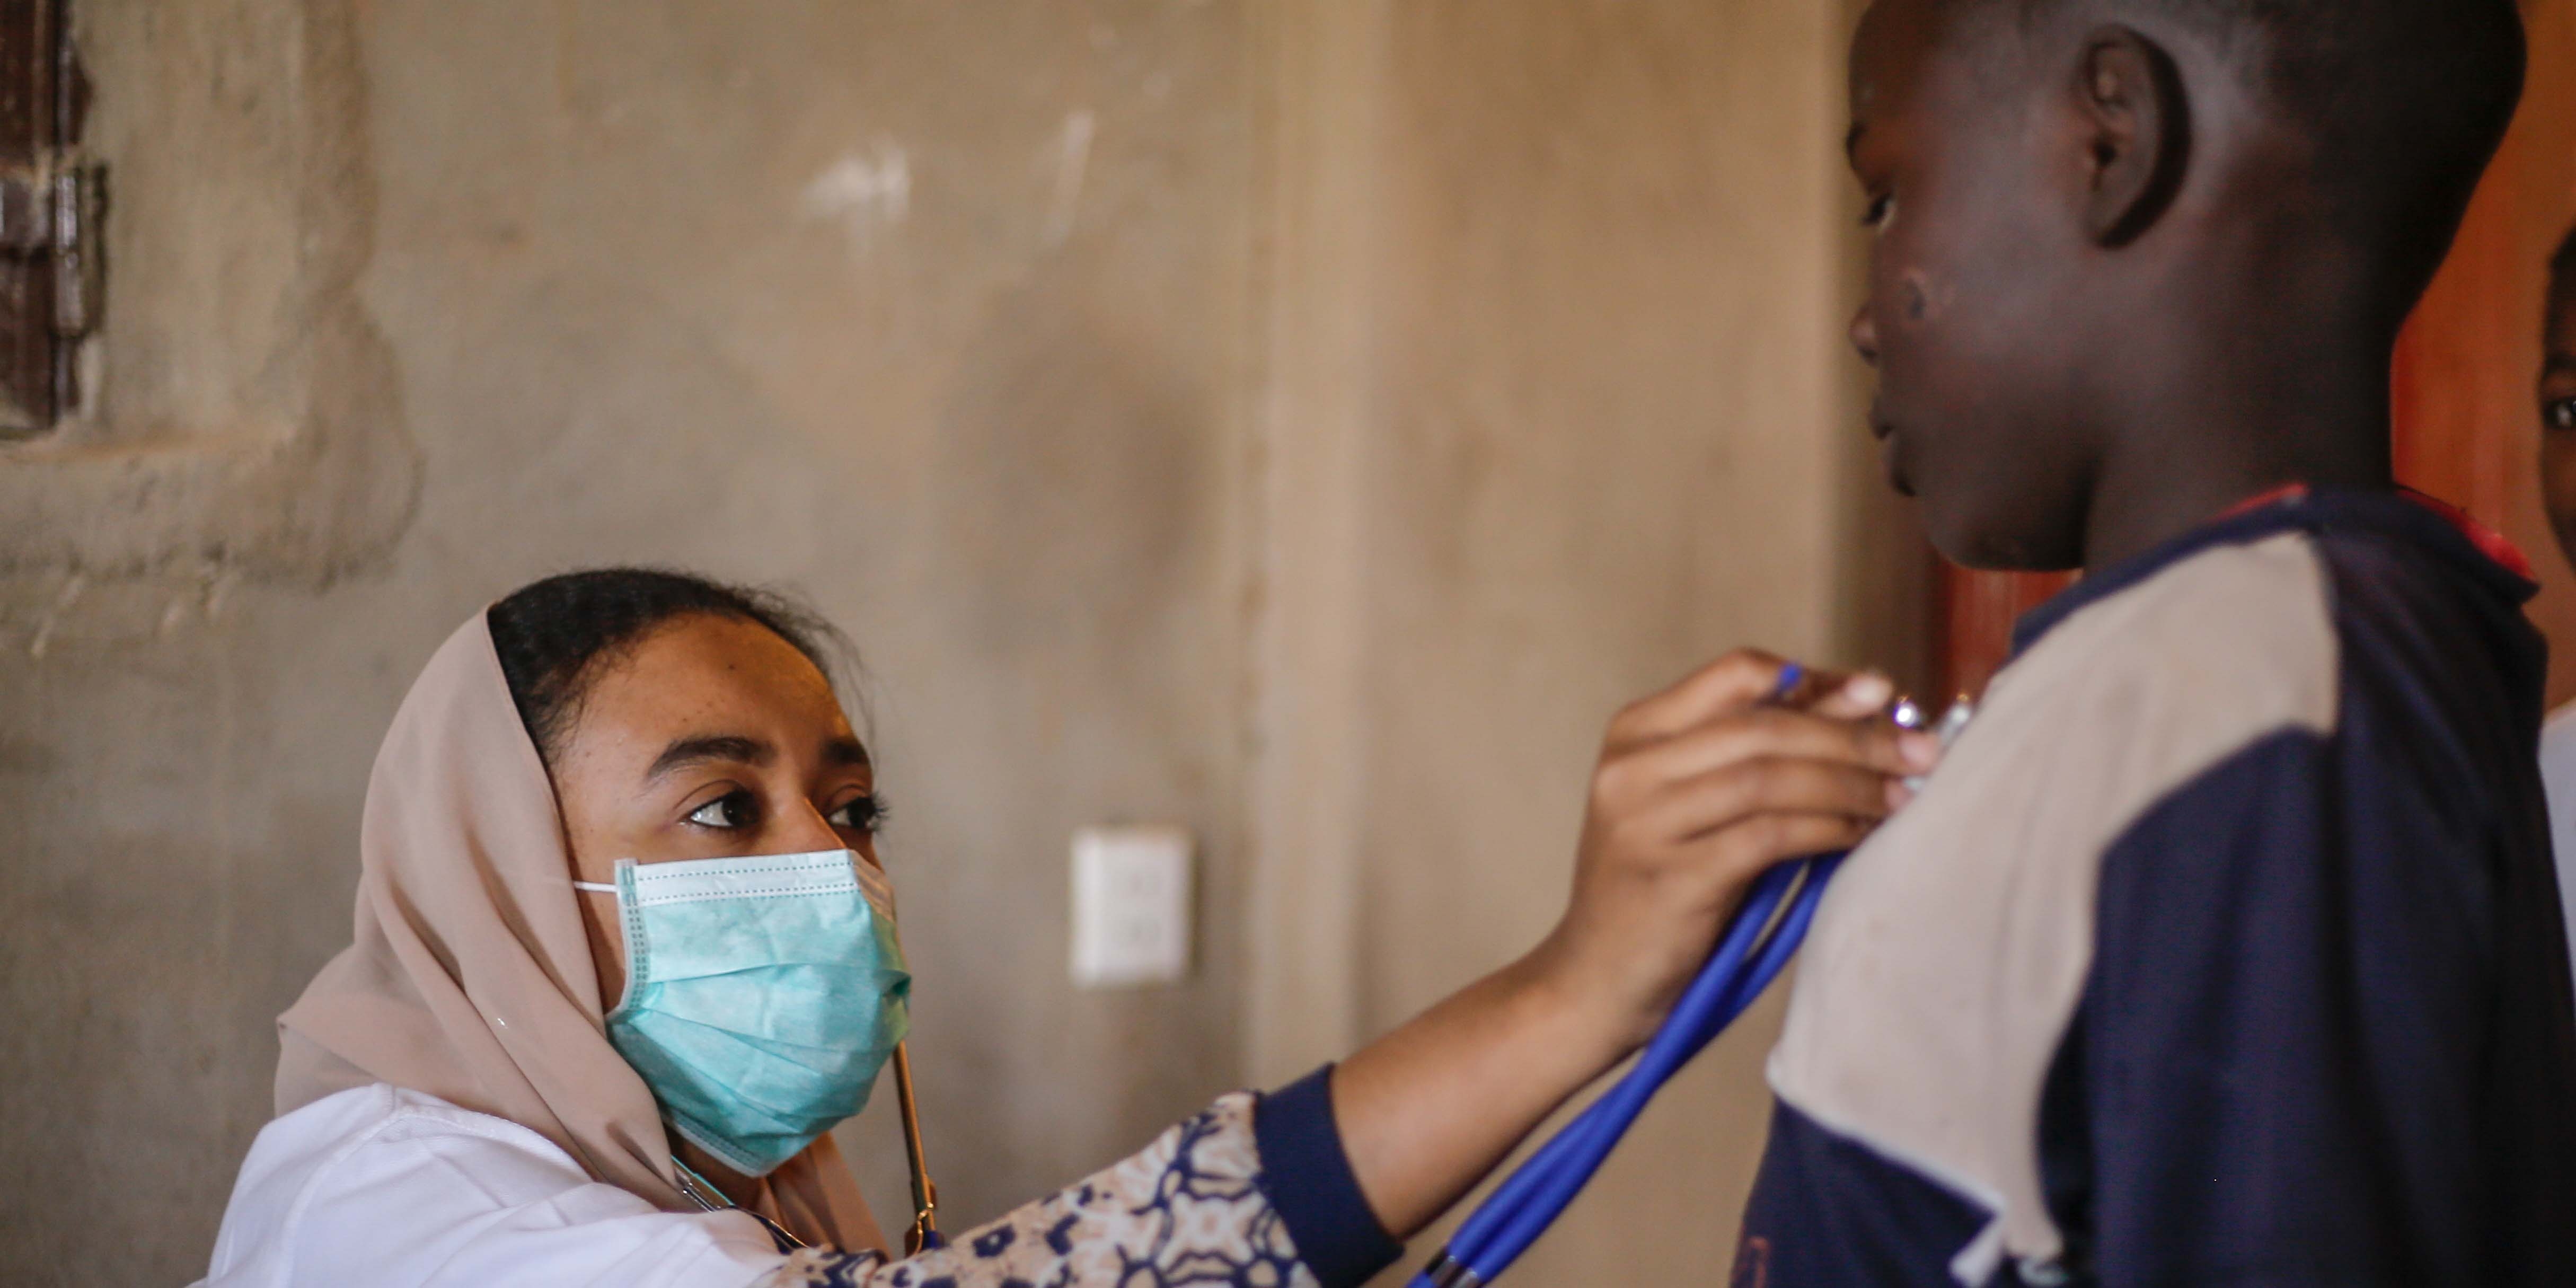 Sudan, a healthcare worker provides treatment to a boy